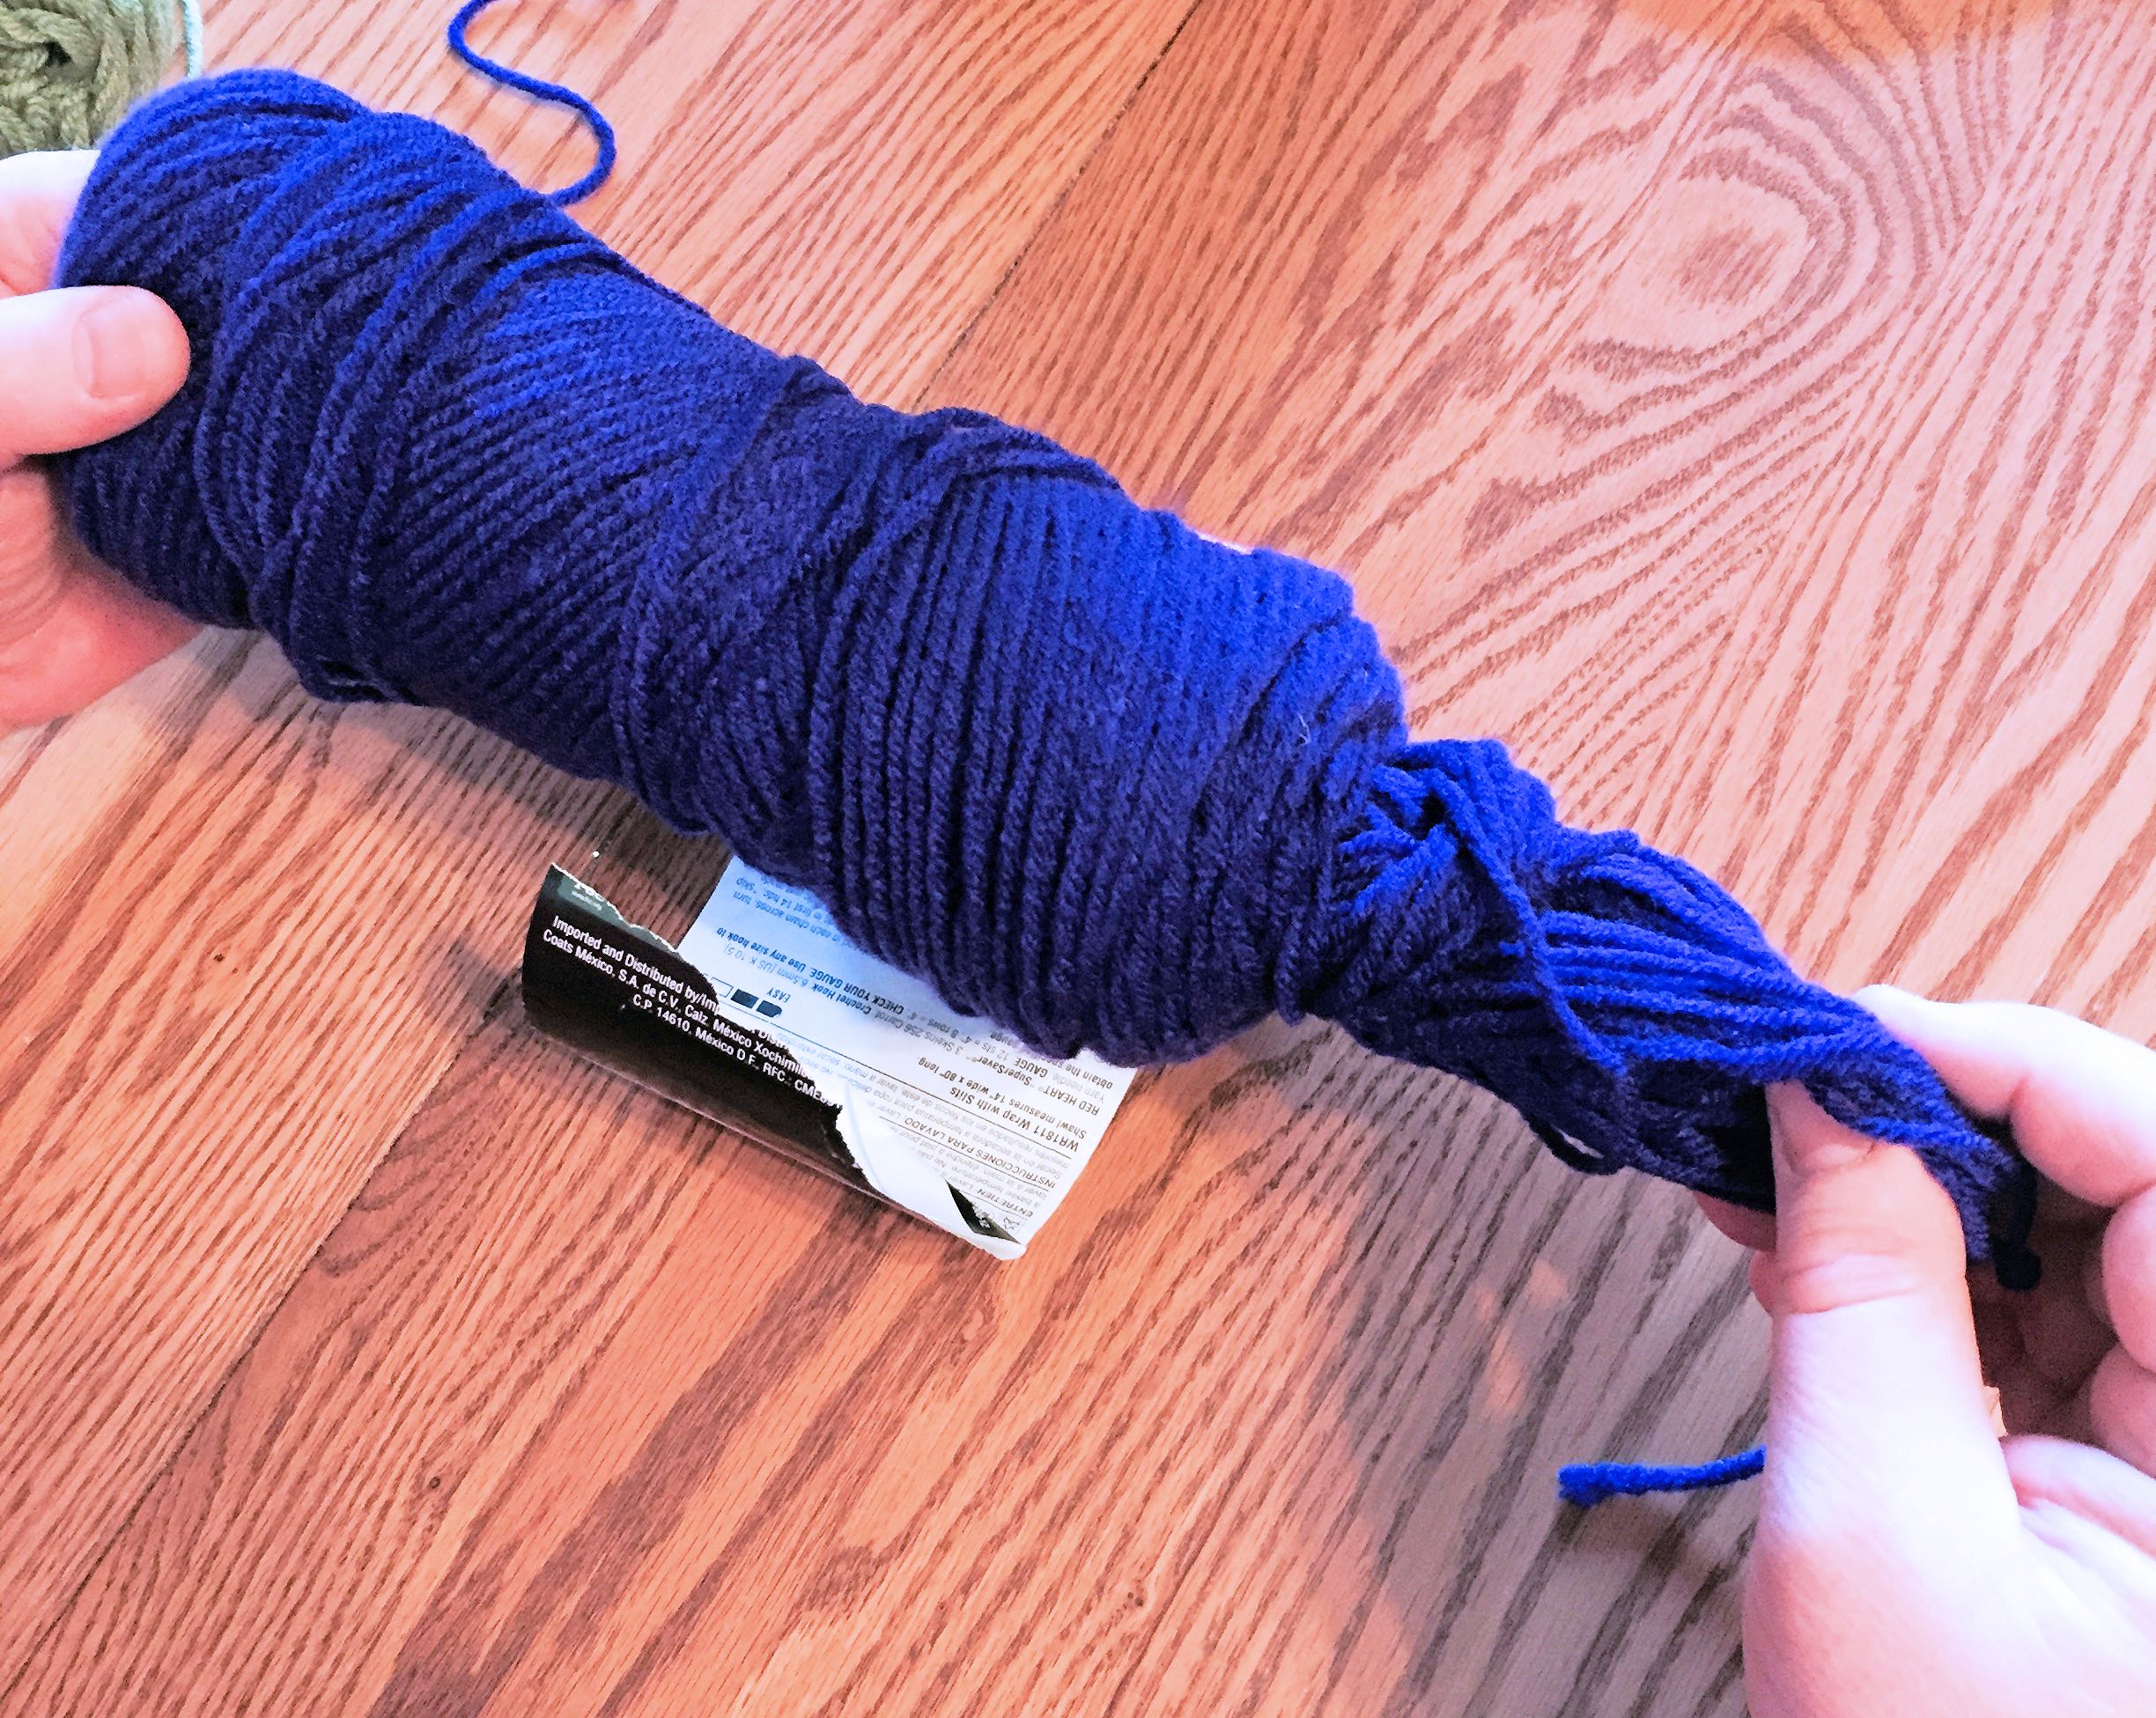 What's the correct way to pull yarn from a skein? – Judy Nolan